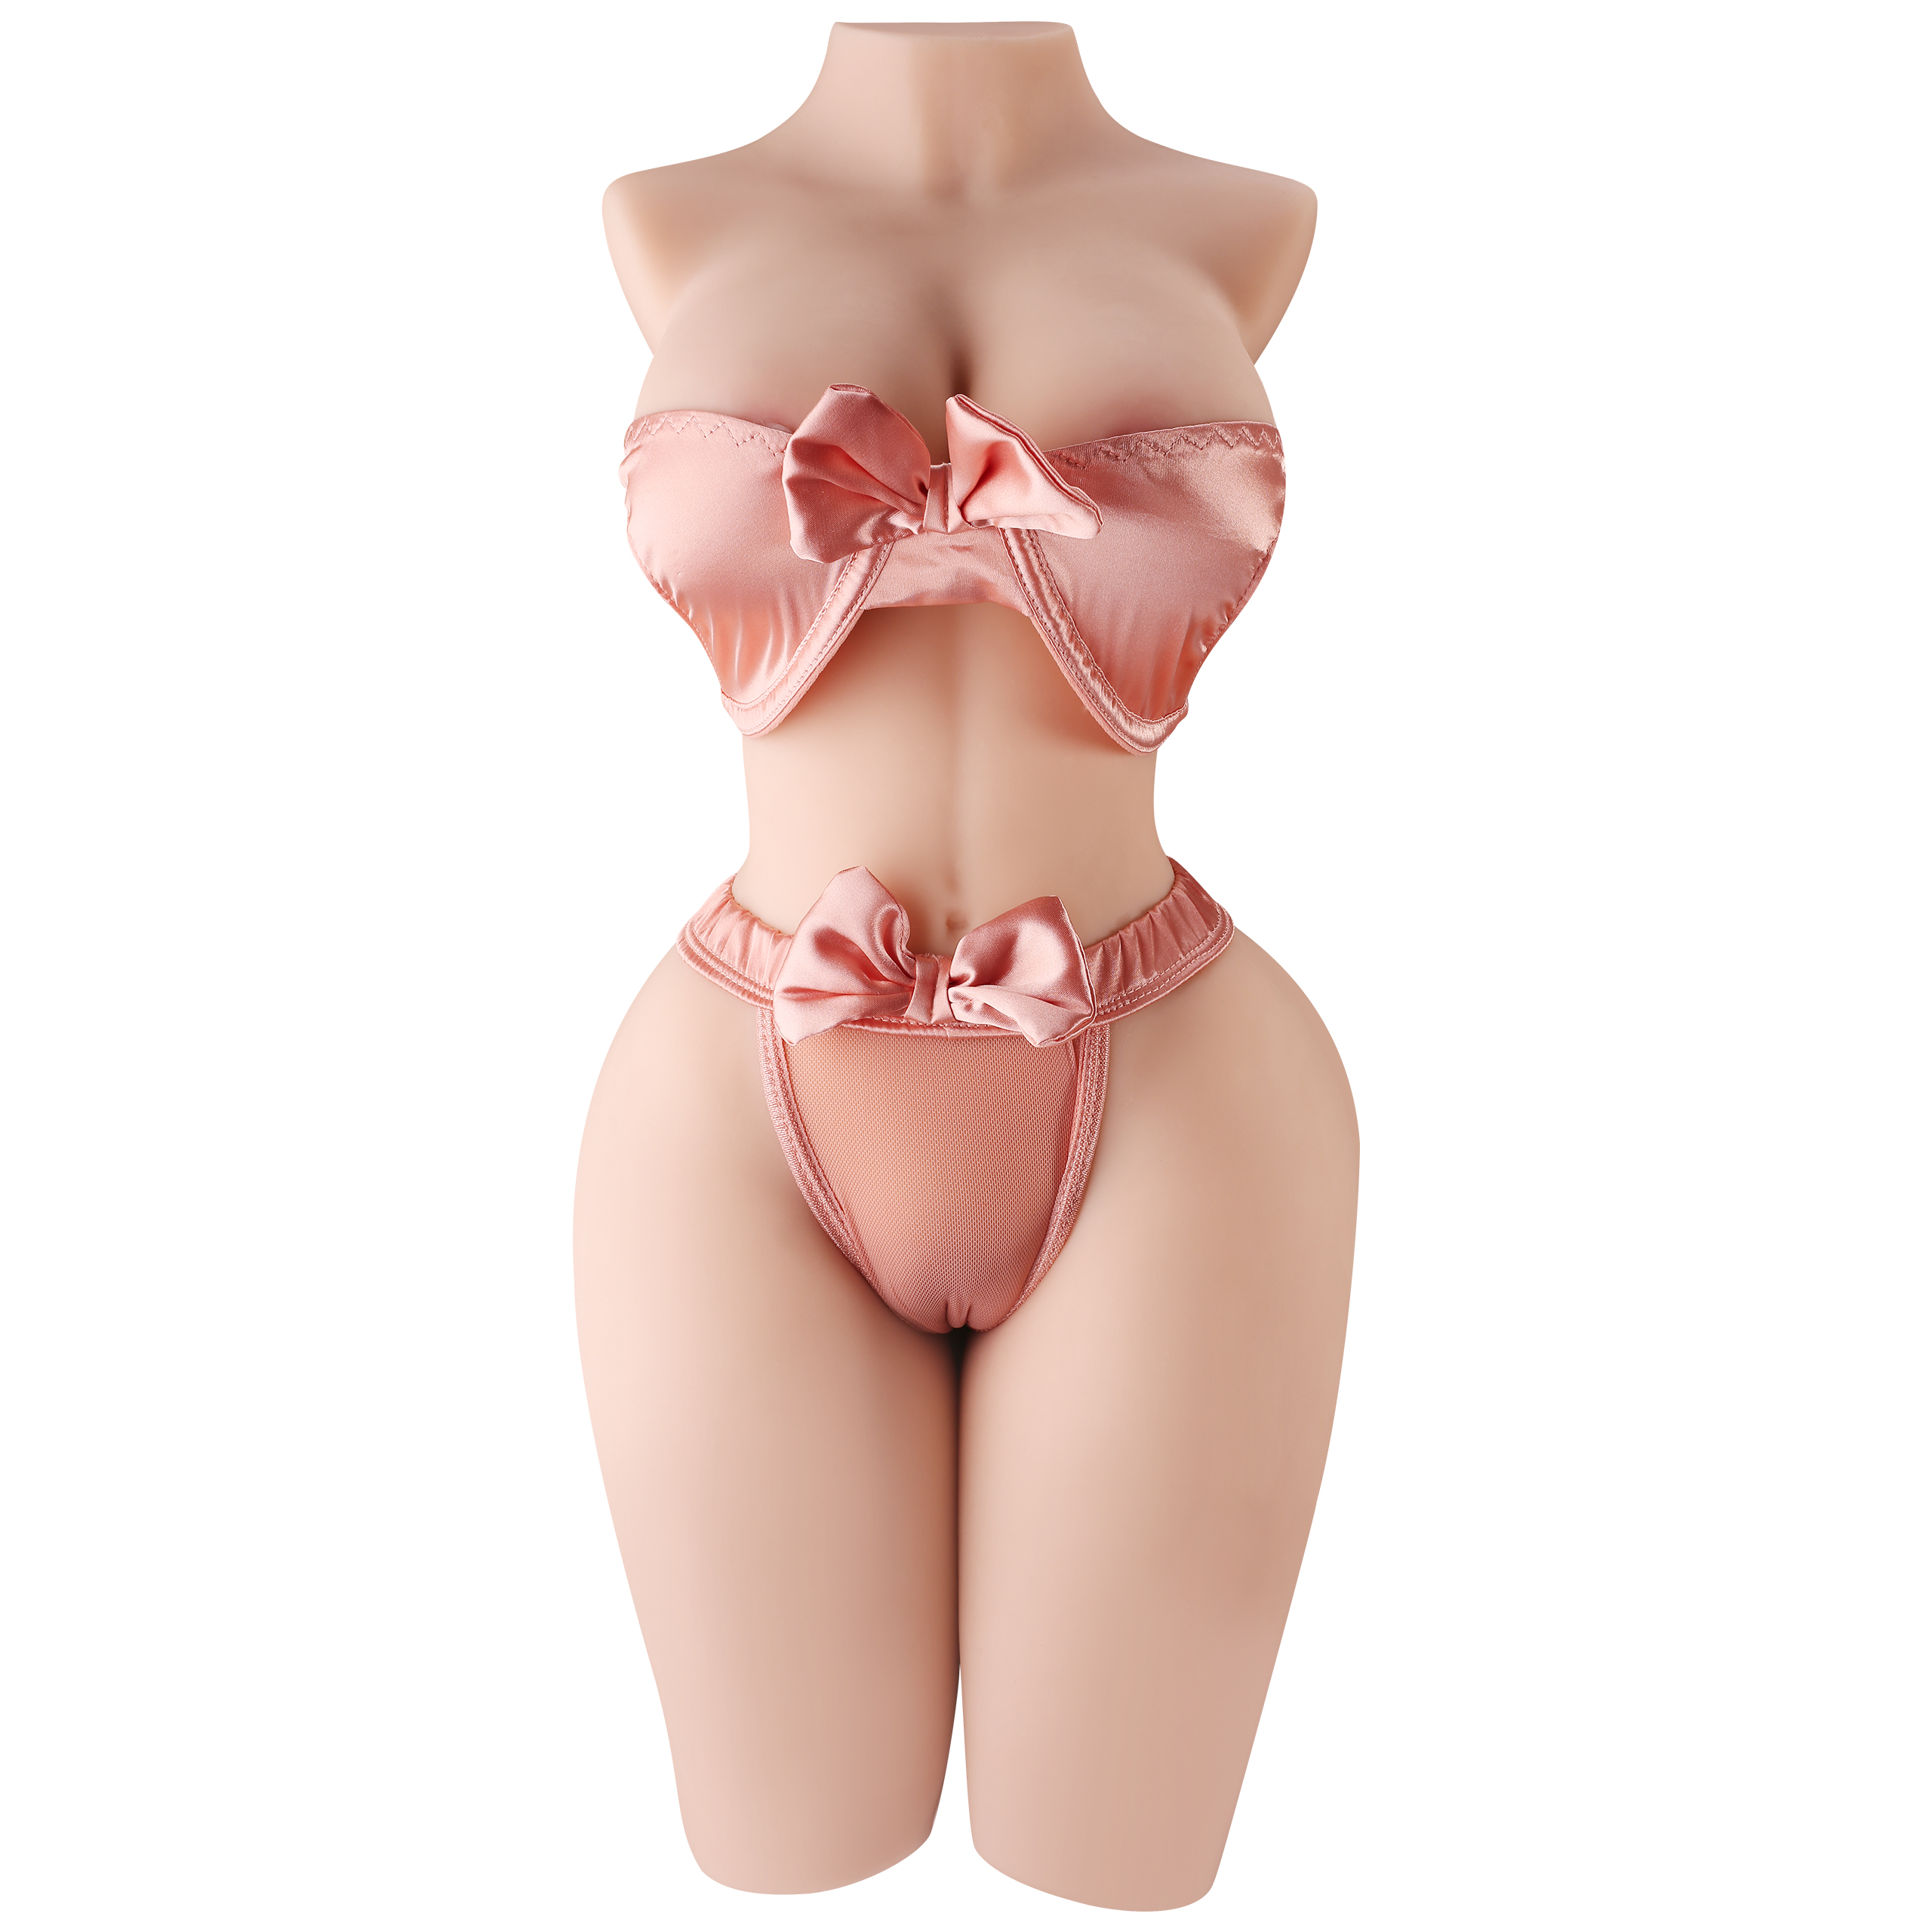 Torso Sex Doll for Men (In Stock US) -  Page-SexDollBabe